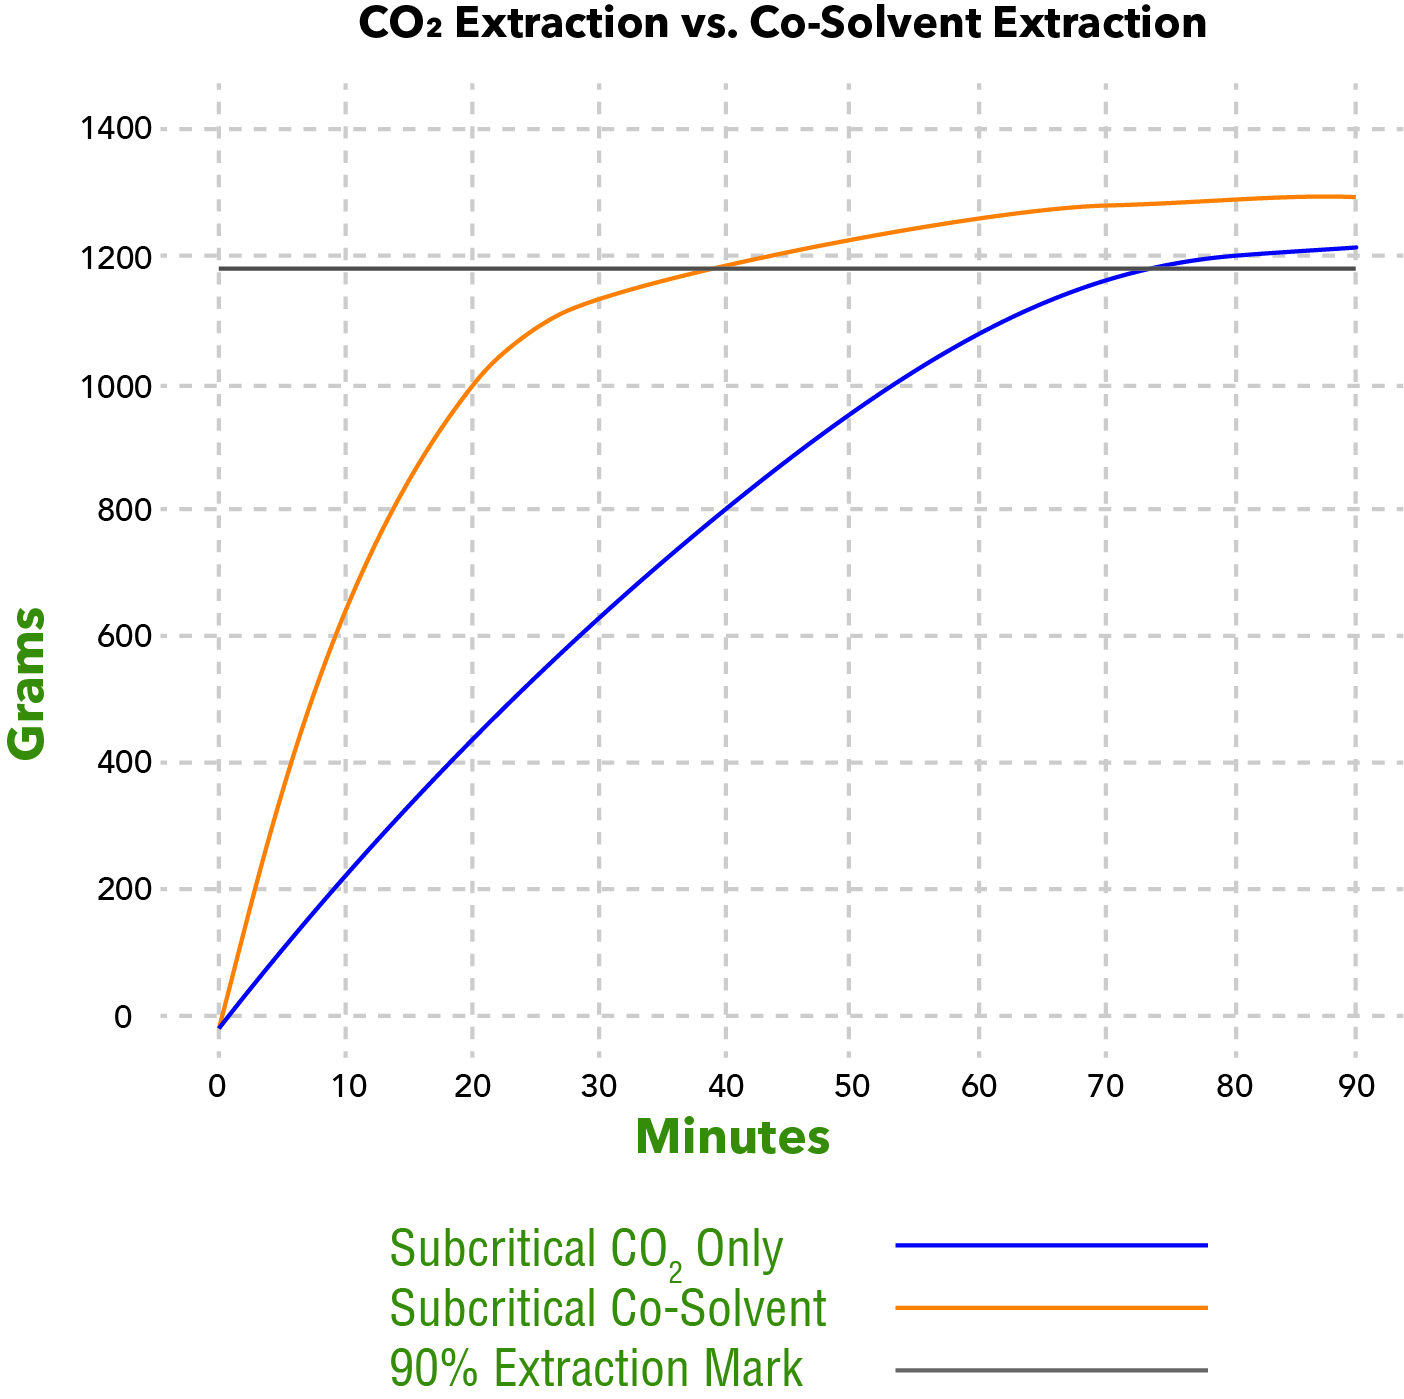 https://campaign-image.com/zohocampaigns/122231000016343220_zc_v32_co2_only_vs_co_solvent.jpg